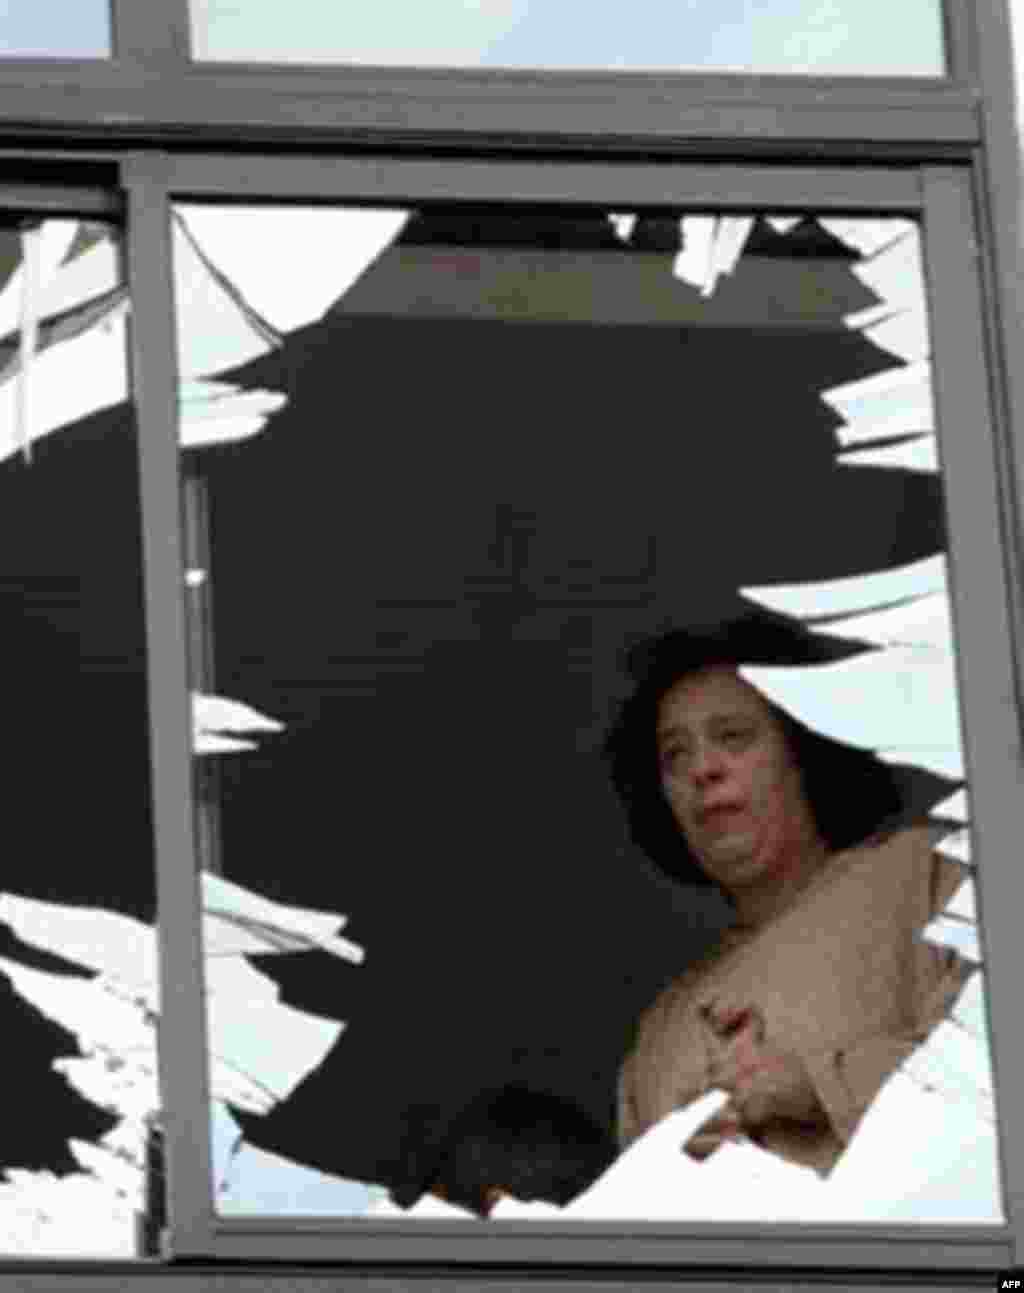 A woman surveys the damage caused by a bomb at a Jewish center in Casablanca, Morocco, on May 17, 2003 (AFP) - At least five bombs exploded simultaneously in Casablanca, Morocco, on May 17, 2003, killing 45 people and injuring scores more. The authorities blame the attacks on Al-Qaeda-affiliated terrorists.